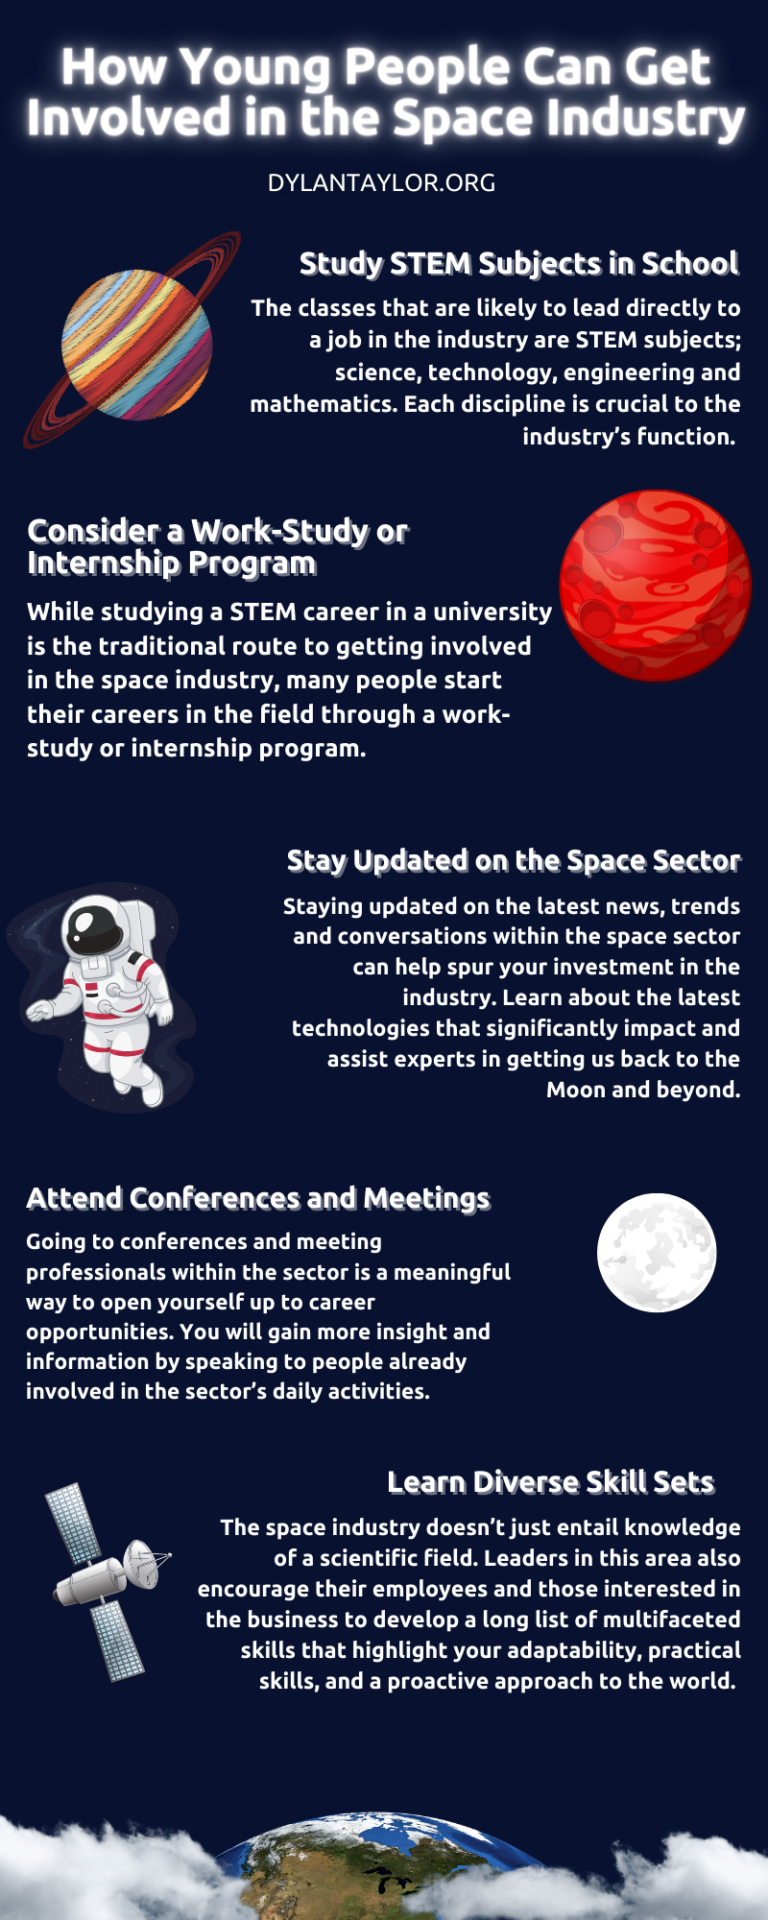 How To Get Involved In Space Industry?